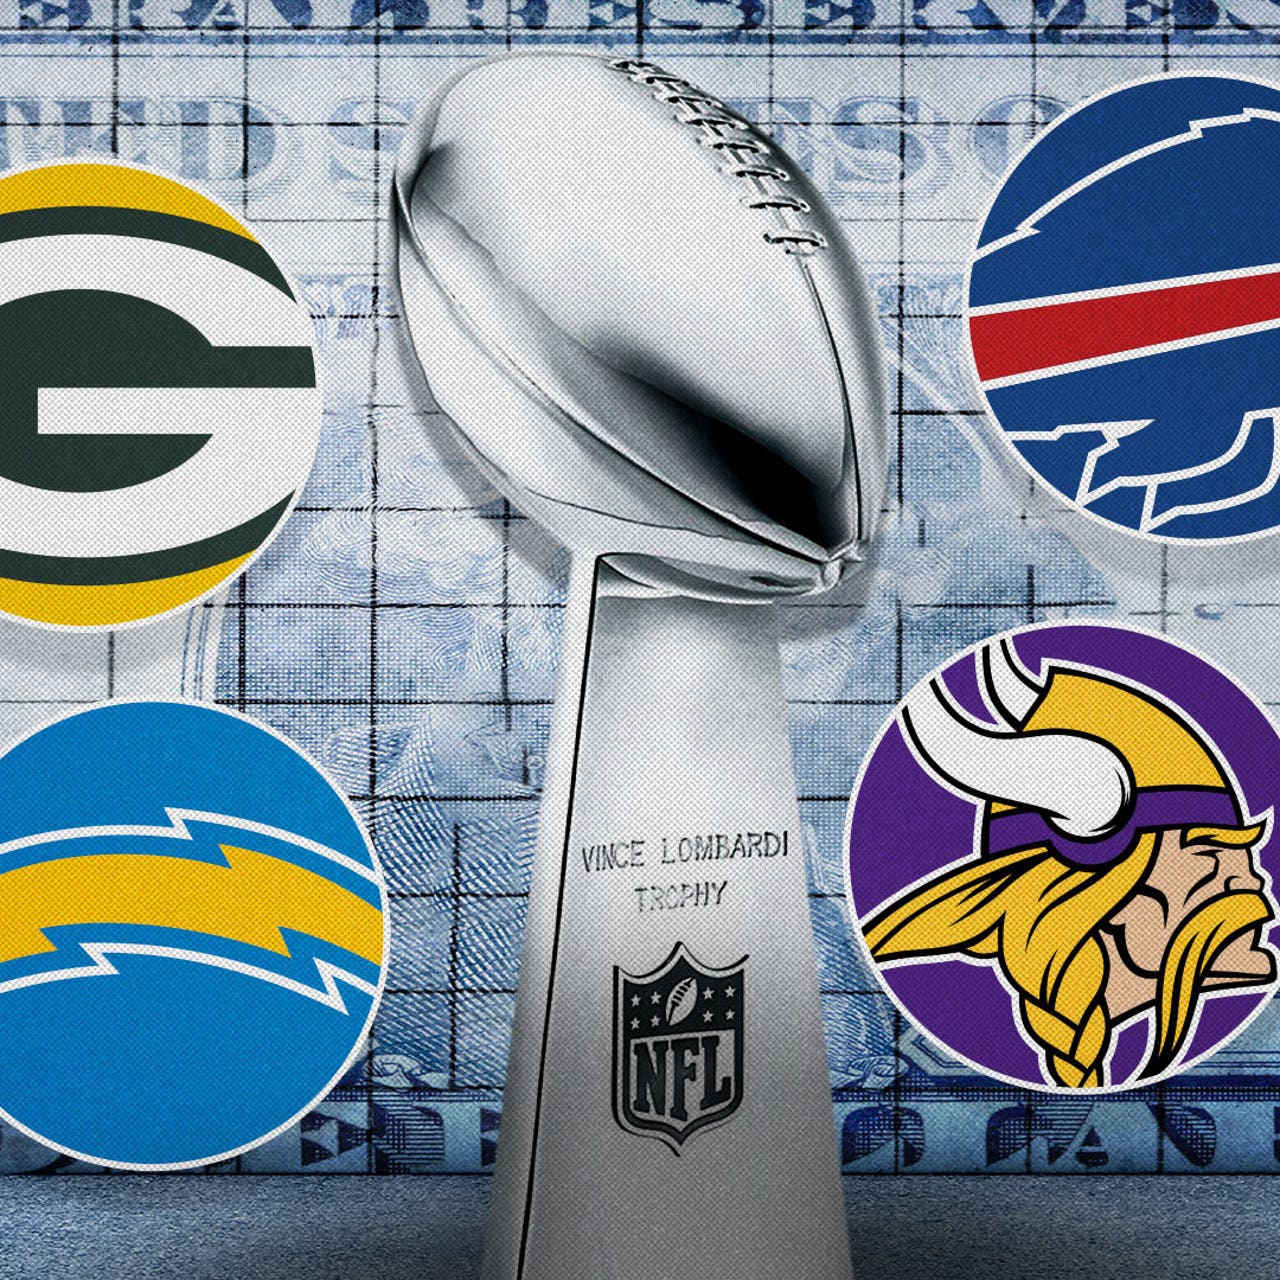 NFL odds: Every team's 2022 Super Bowl odds, from worst to best bets